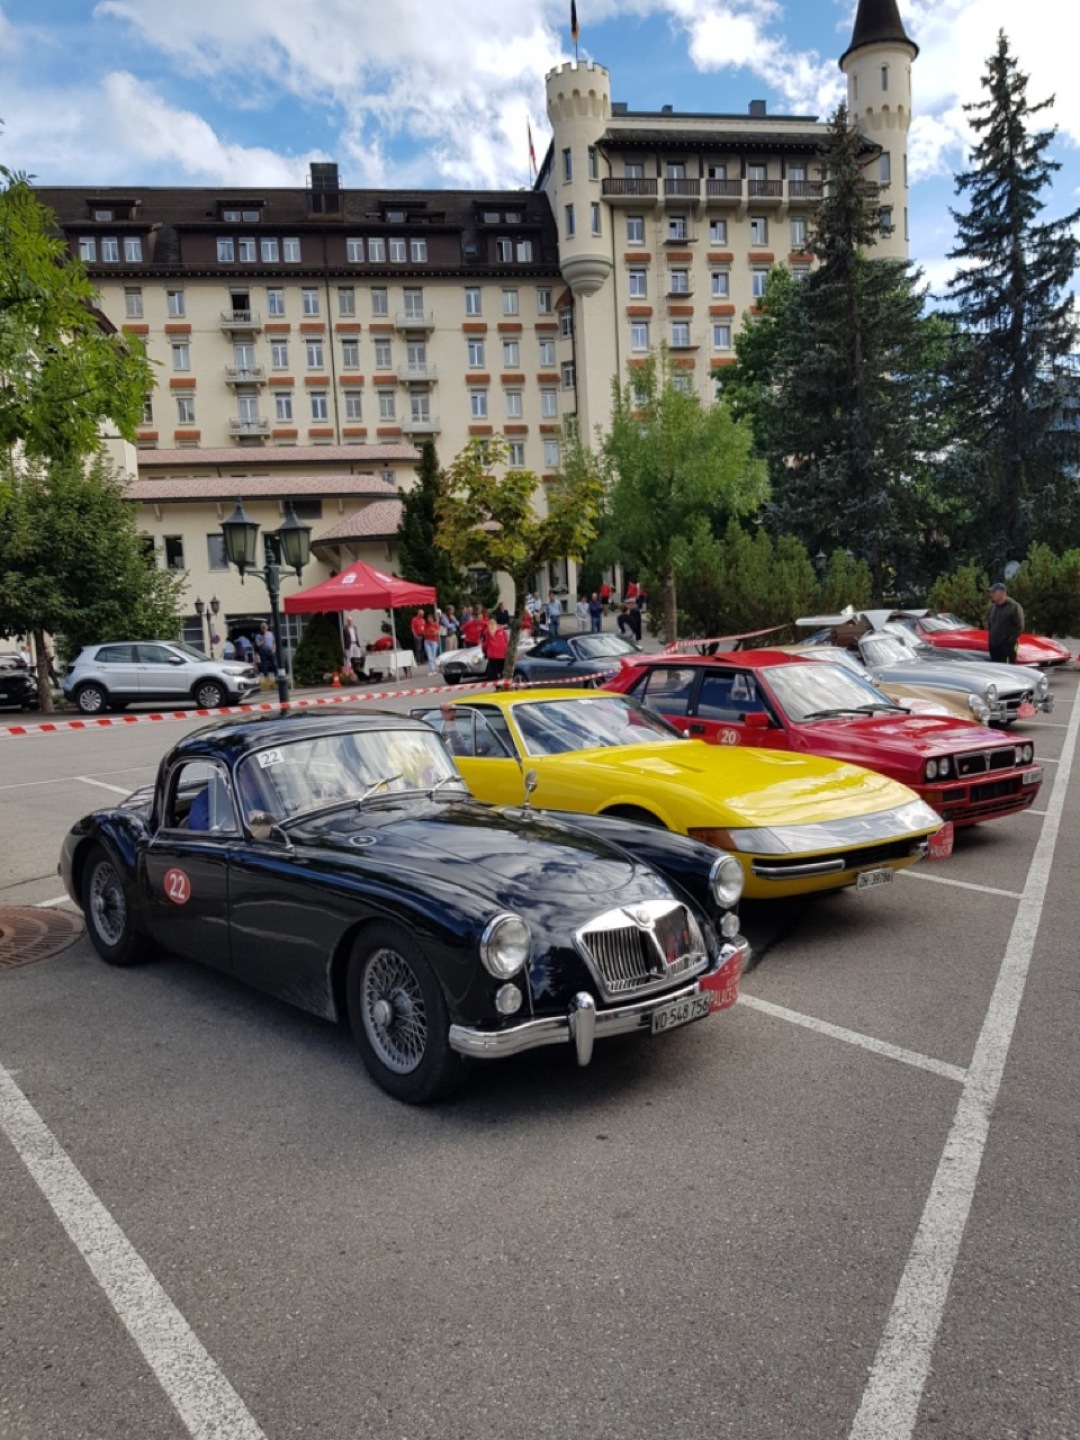 MGH 1600 MK II Coupé, BJ 1961, parked in the row of other cars.